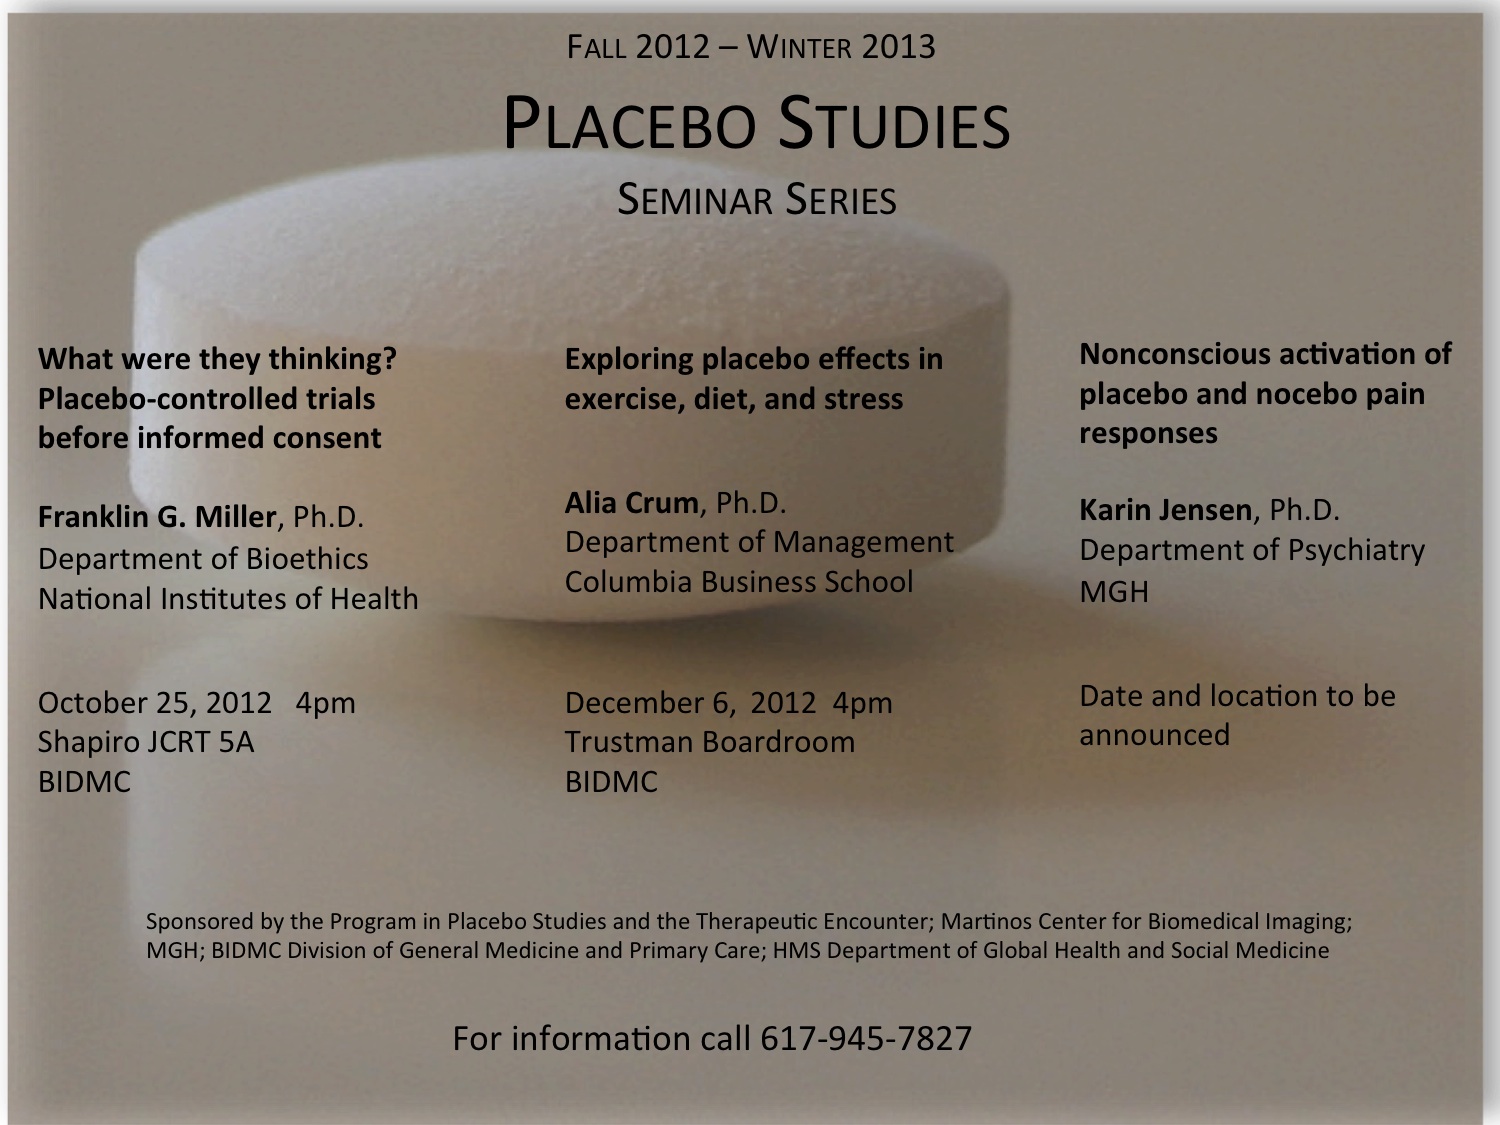 Fall/Winter 2012-13 | Program in Placebo Studies & Therapeutic